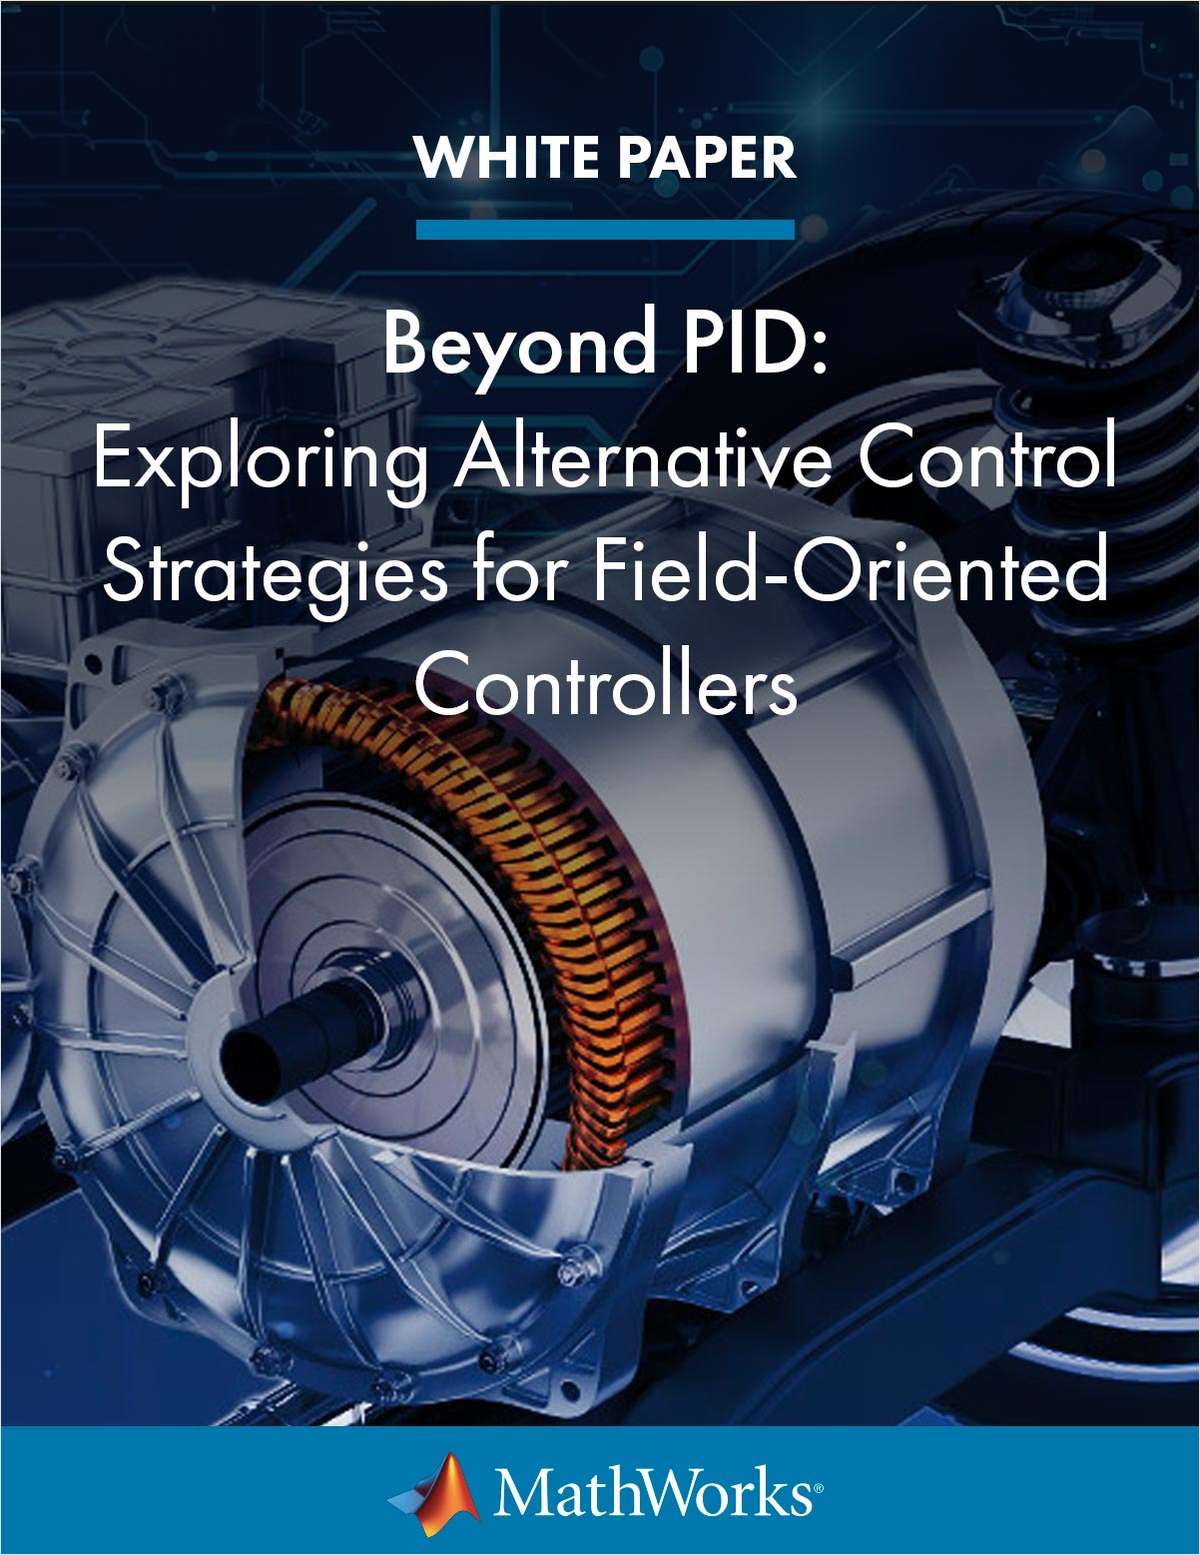 Beyond PID: Exploring Alternative Control Strategies for Field-Oriented Controllers